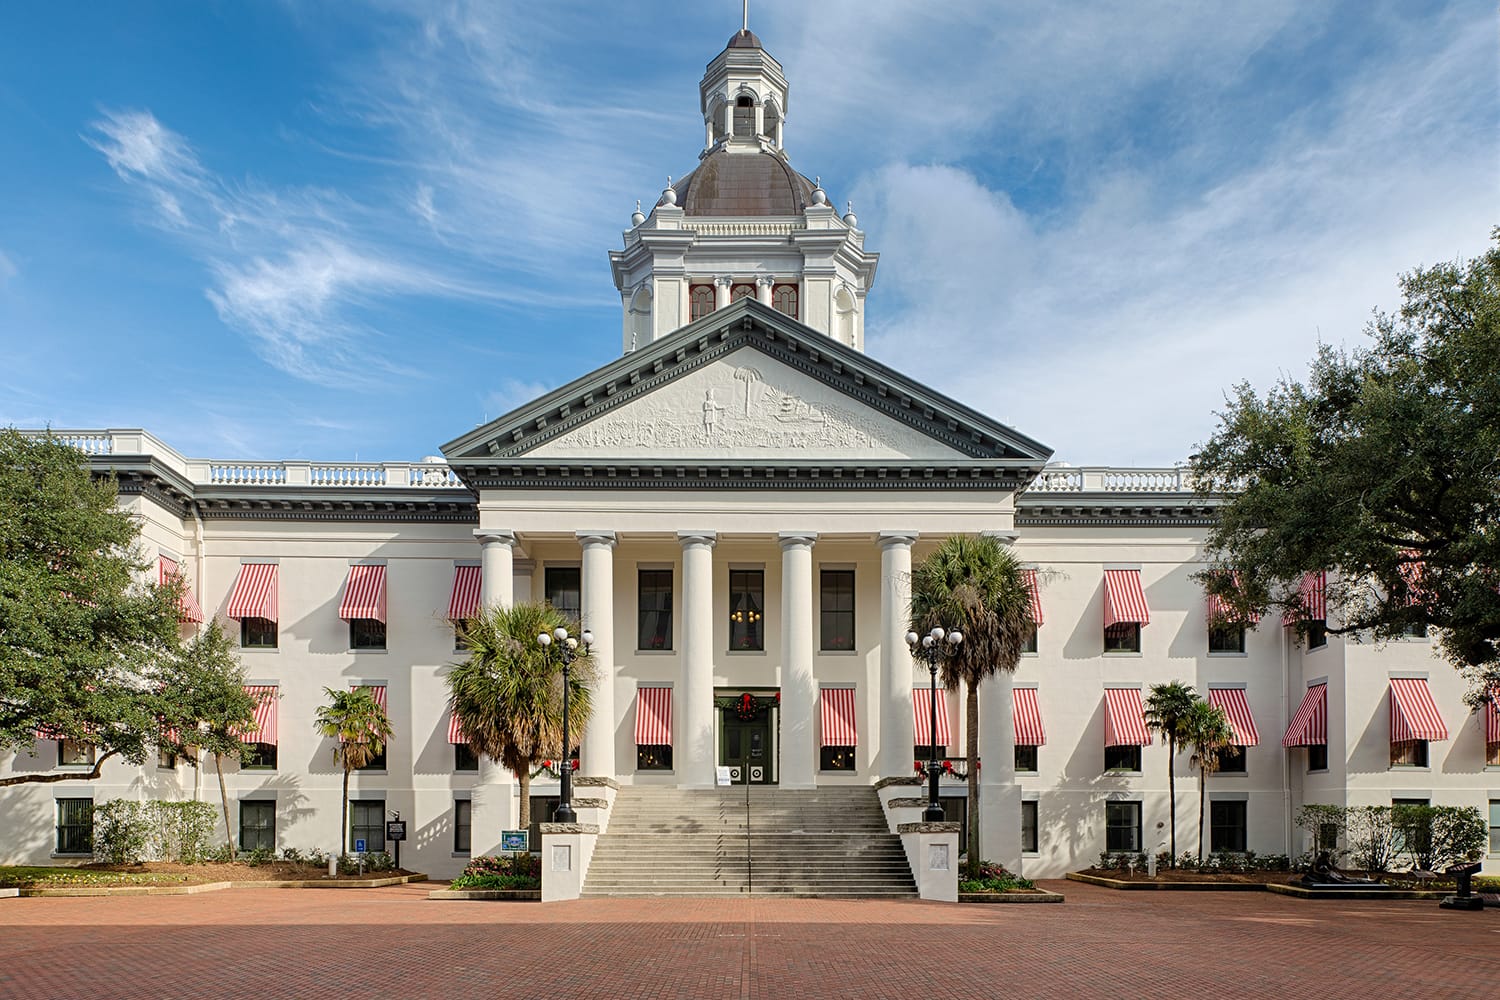 Old Florida State Capitol building in Tallahassee, Florida